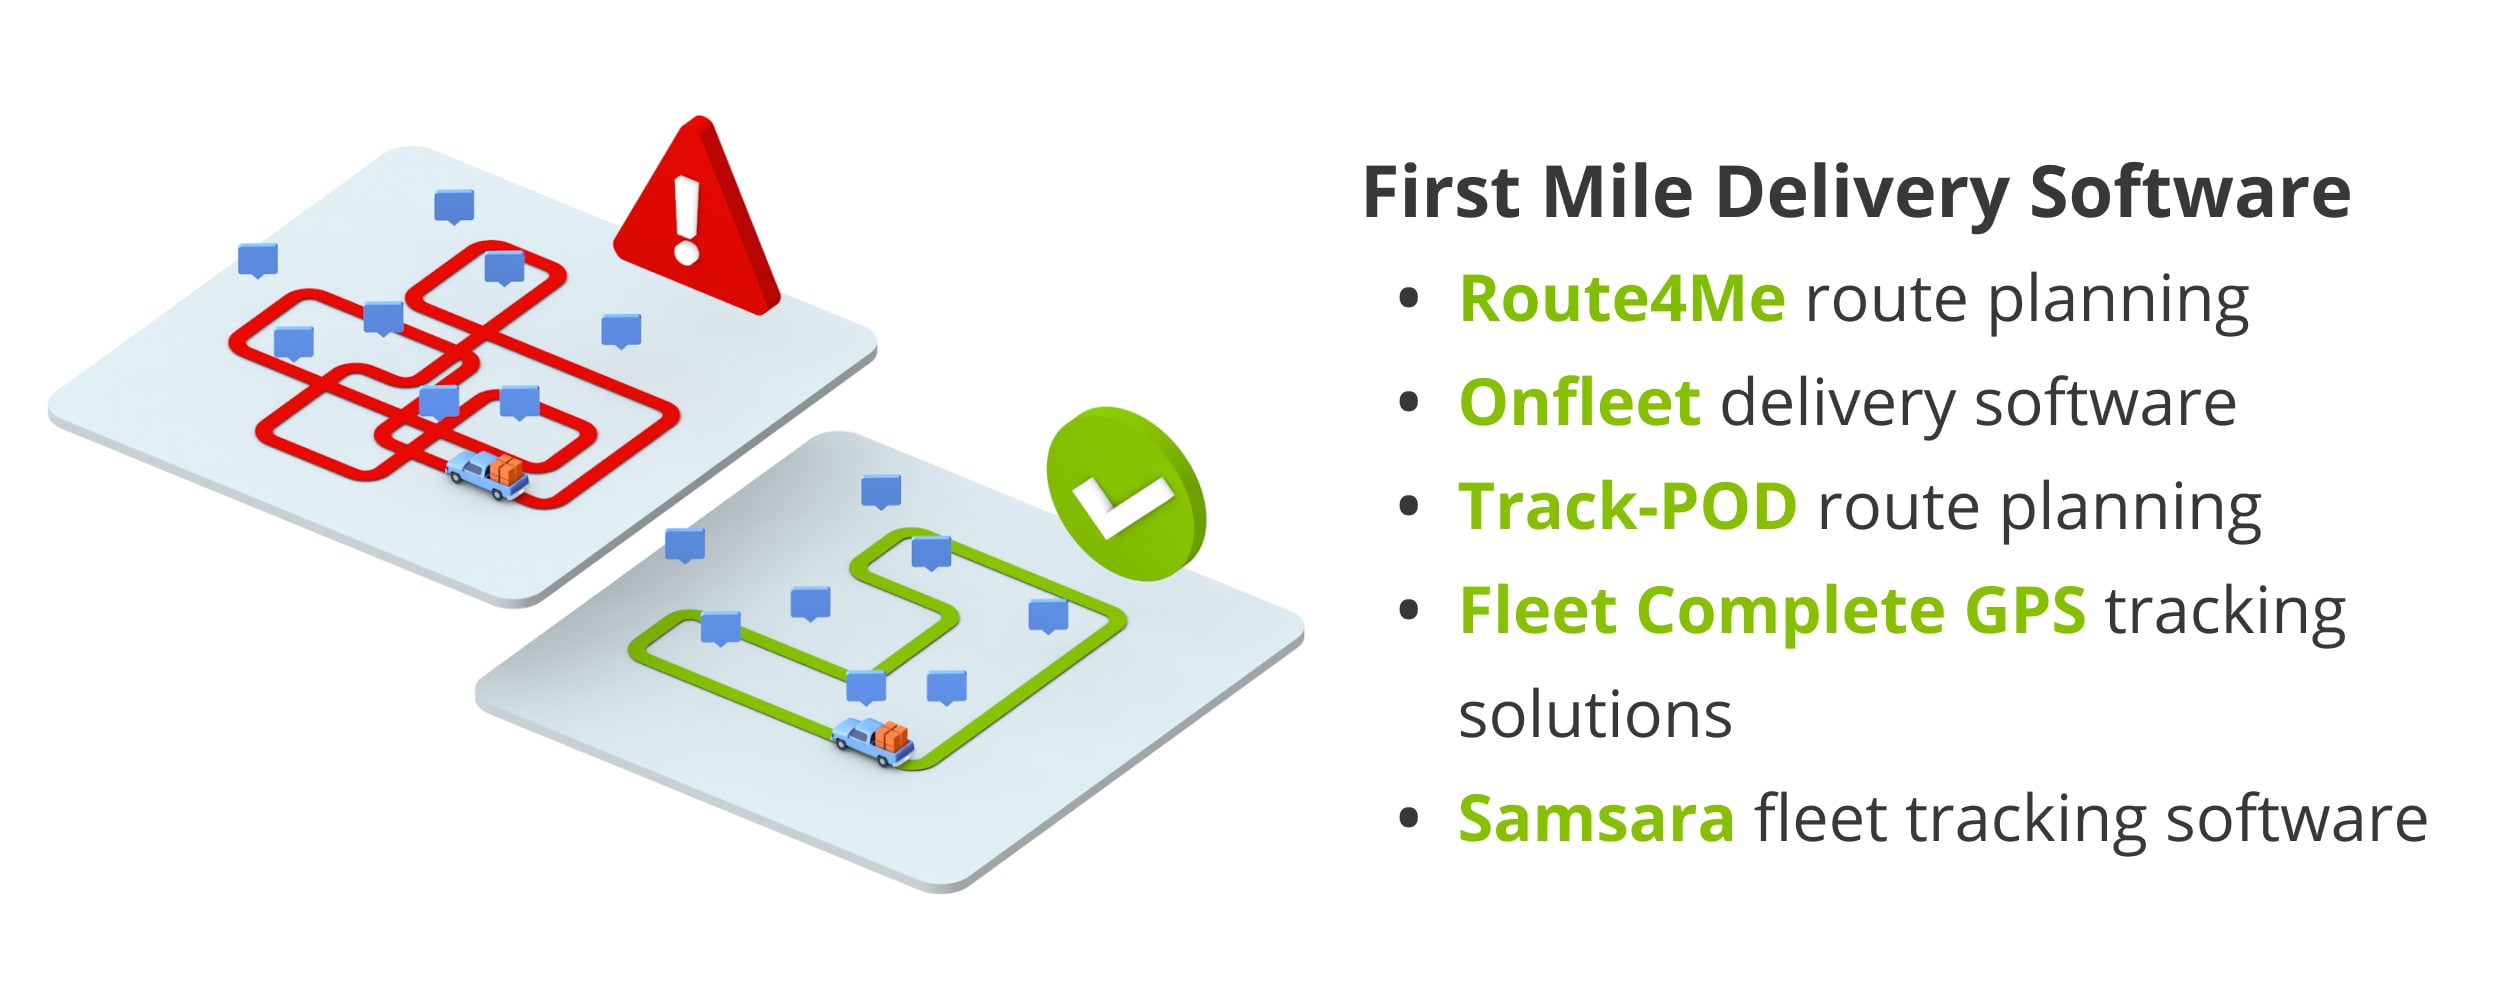 The best first mile delivery software in 2021 for route optimization, fleet management, and GPS tracking.